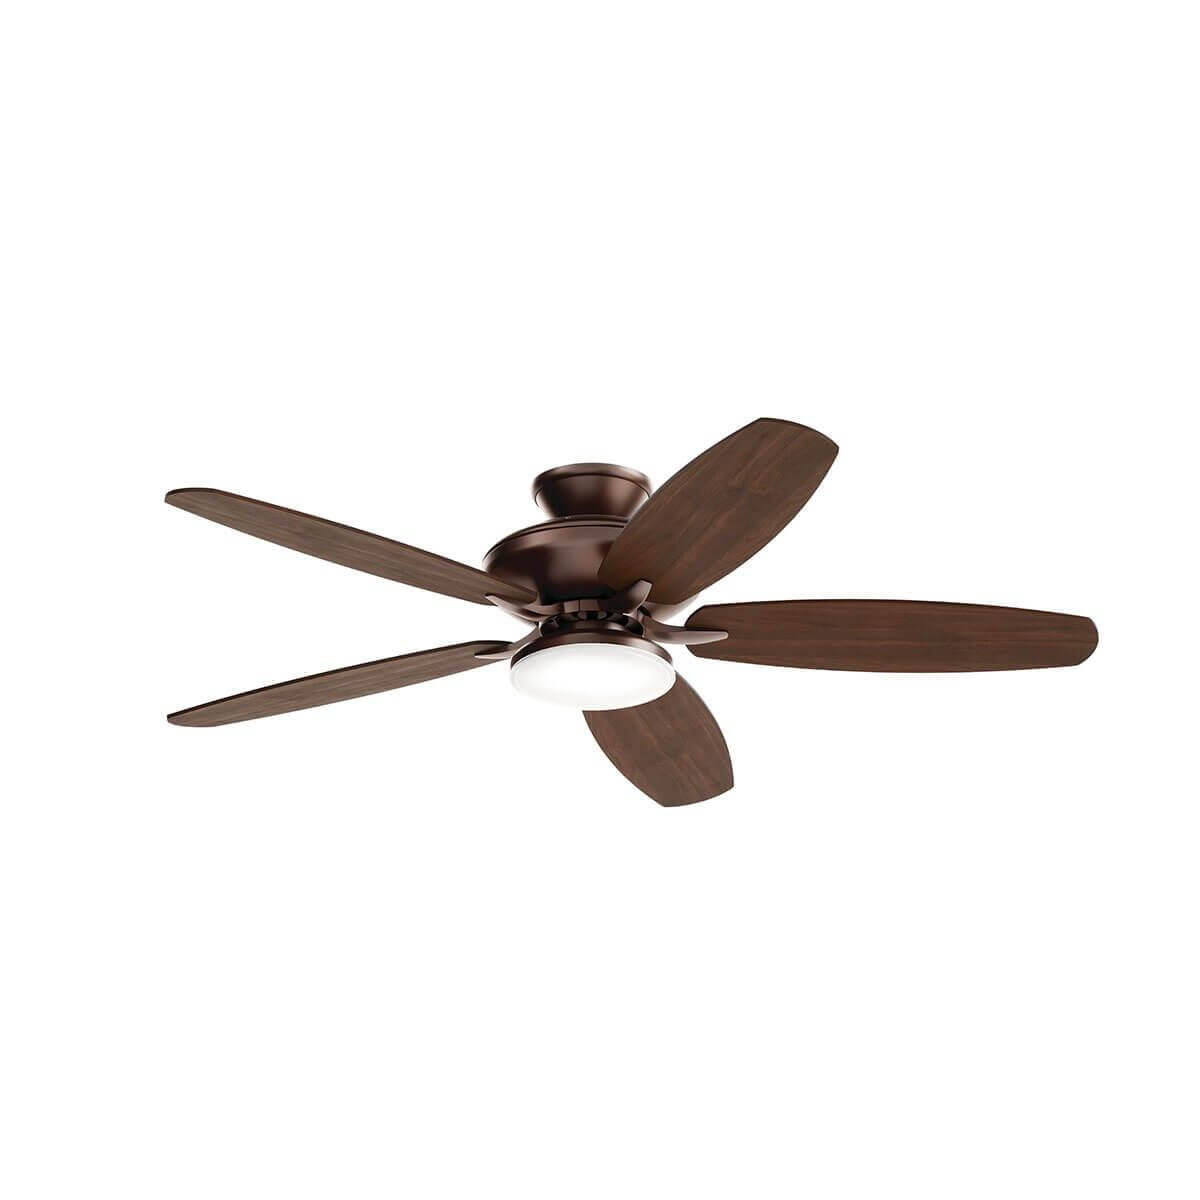 Kichler 330163SNB Renew 52 inch 5 Blade LED Ceiling Fan in Satin Natural Bronze with Walnut-Cherry Blade